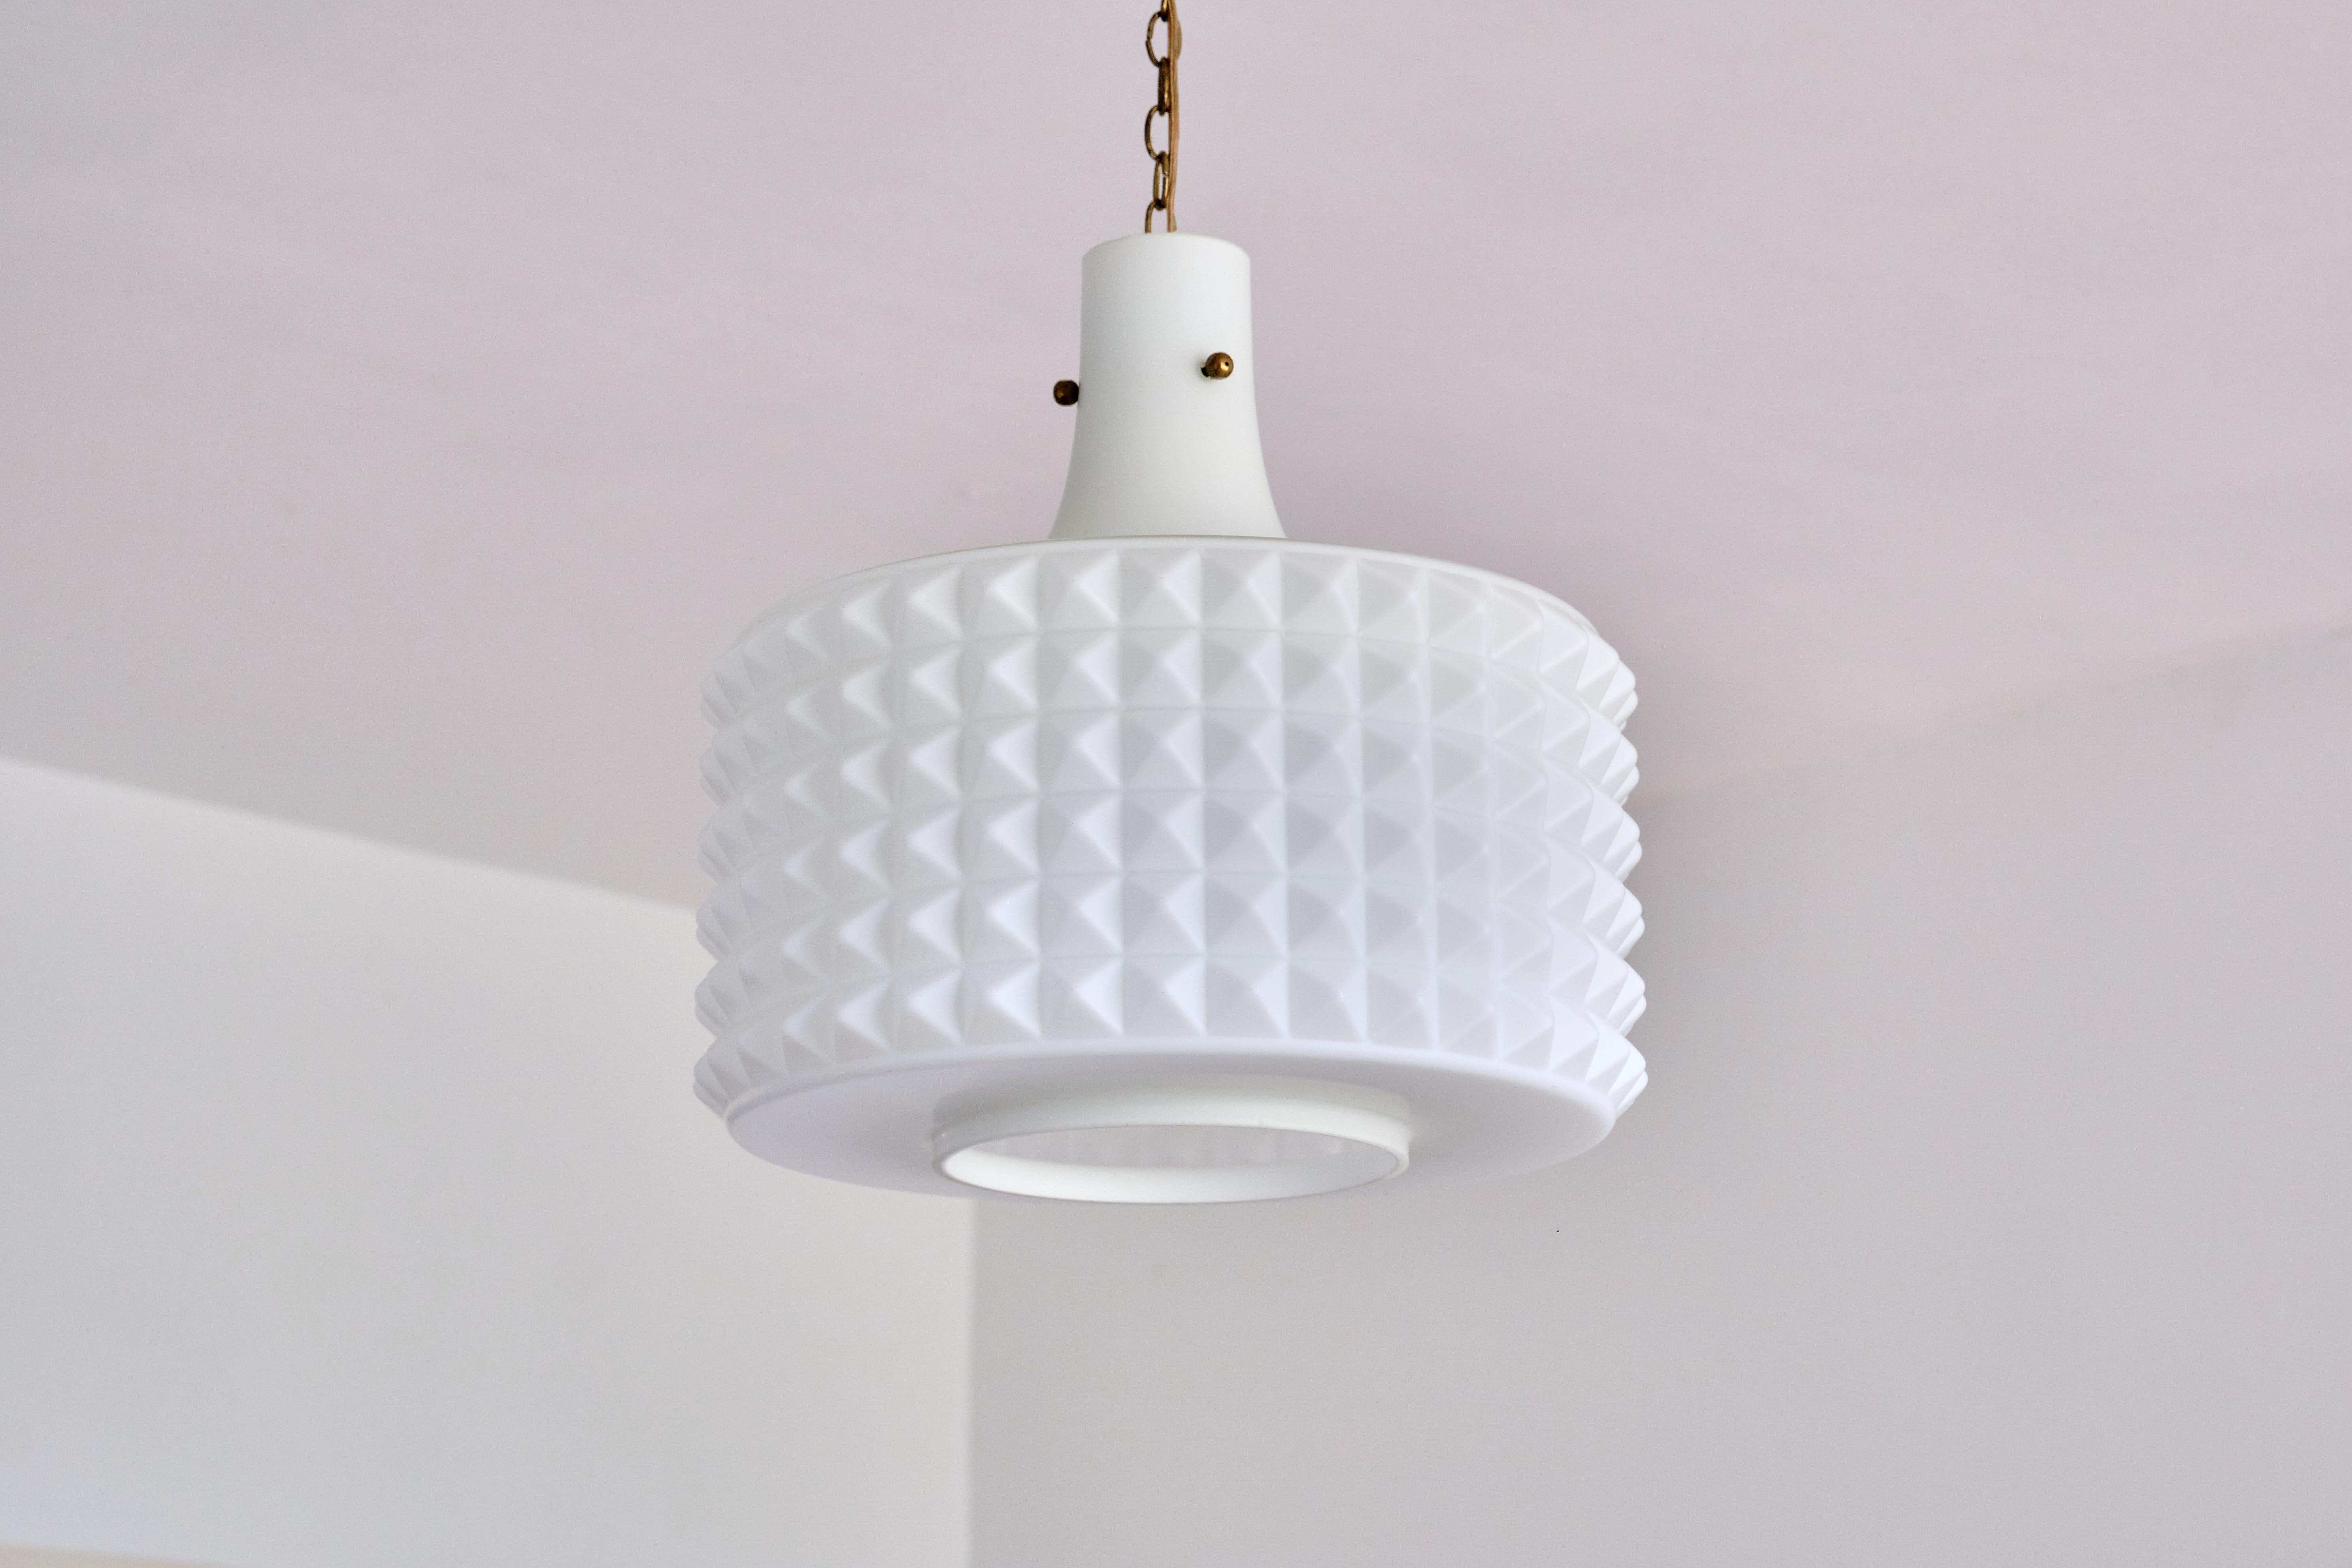 Mid-20th Century Swedish Modernist Studded Pendant Lamp in Opaline Glass, Orrefors, 1950s For Sale